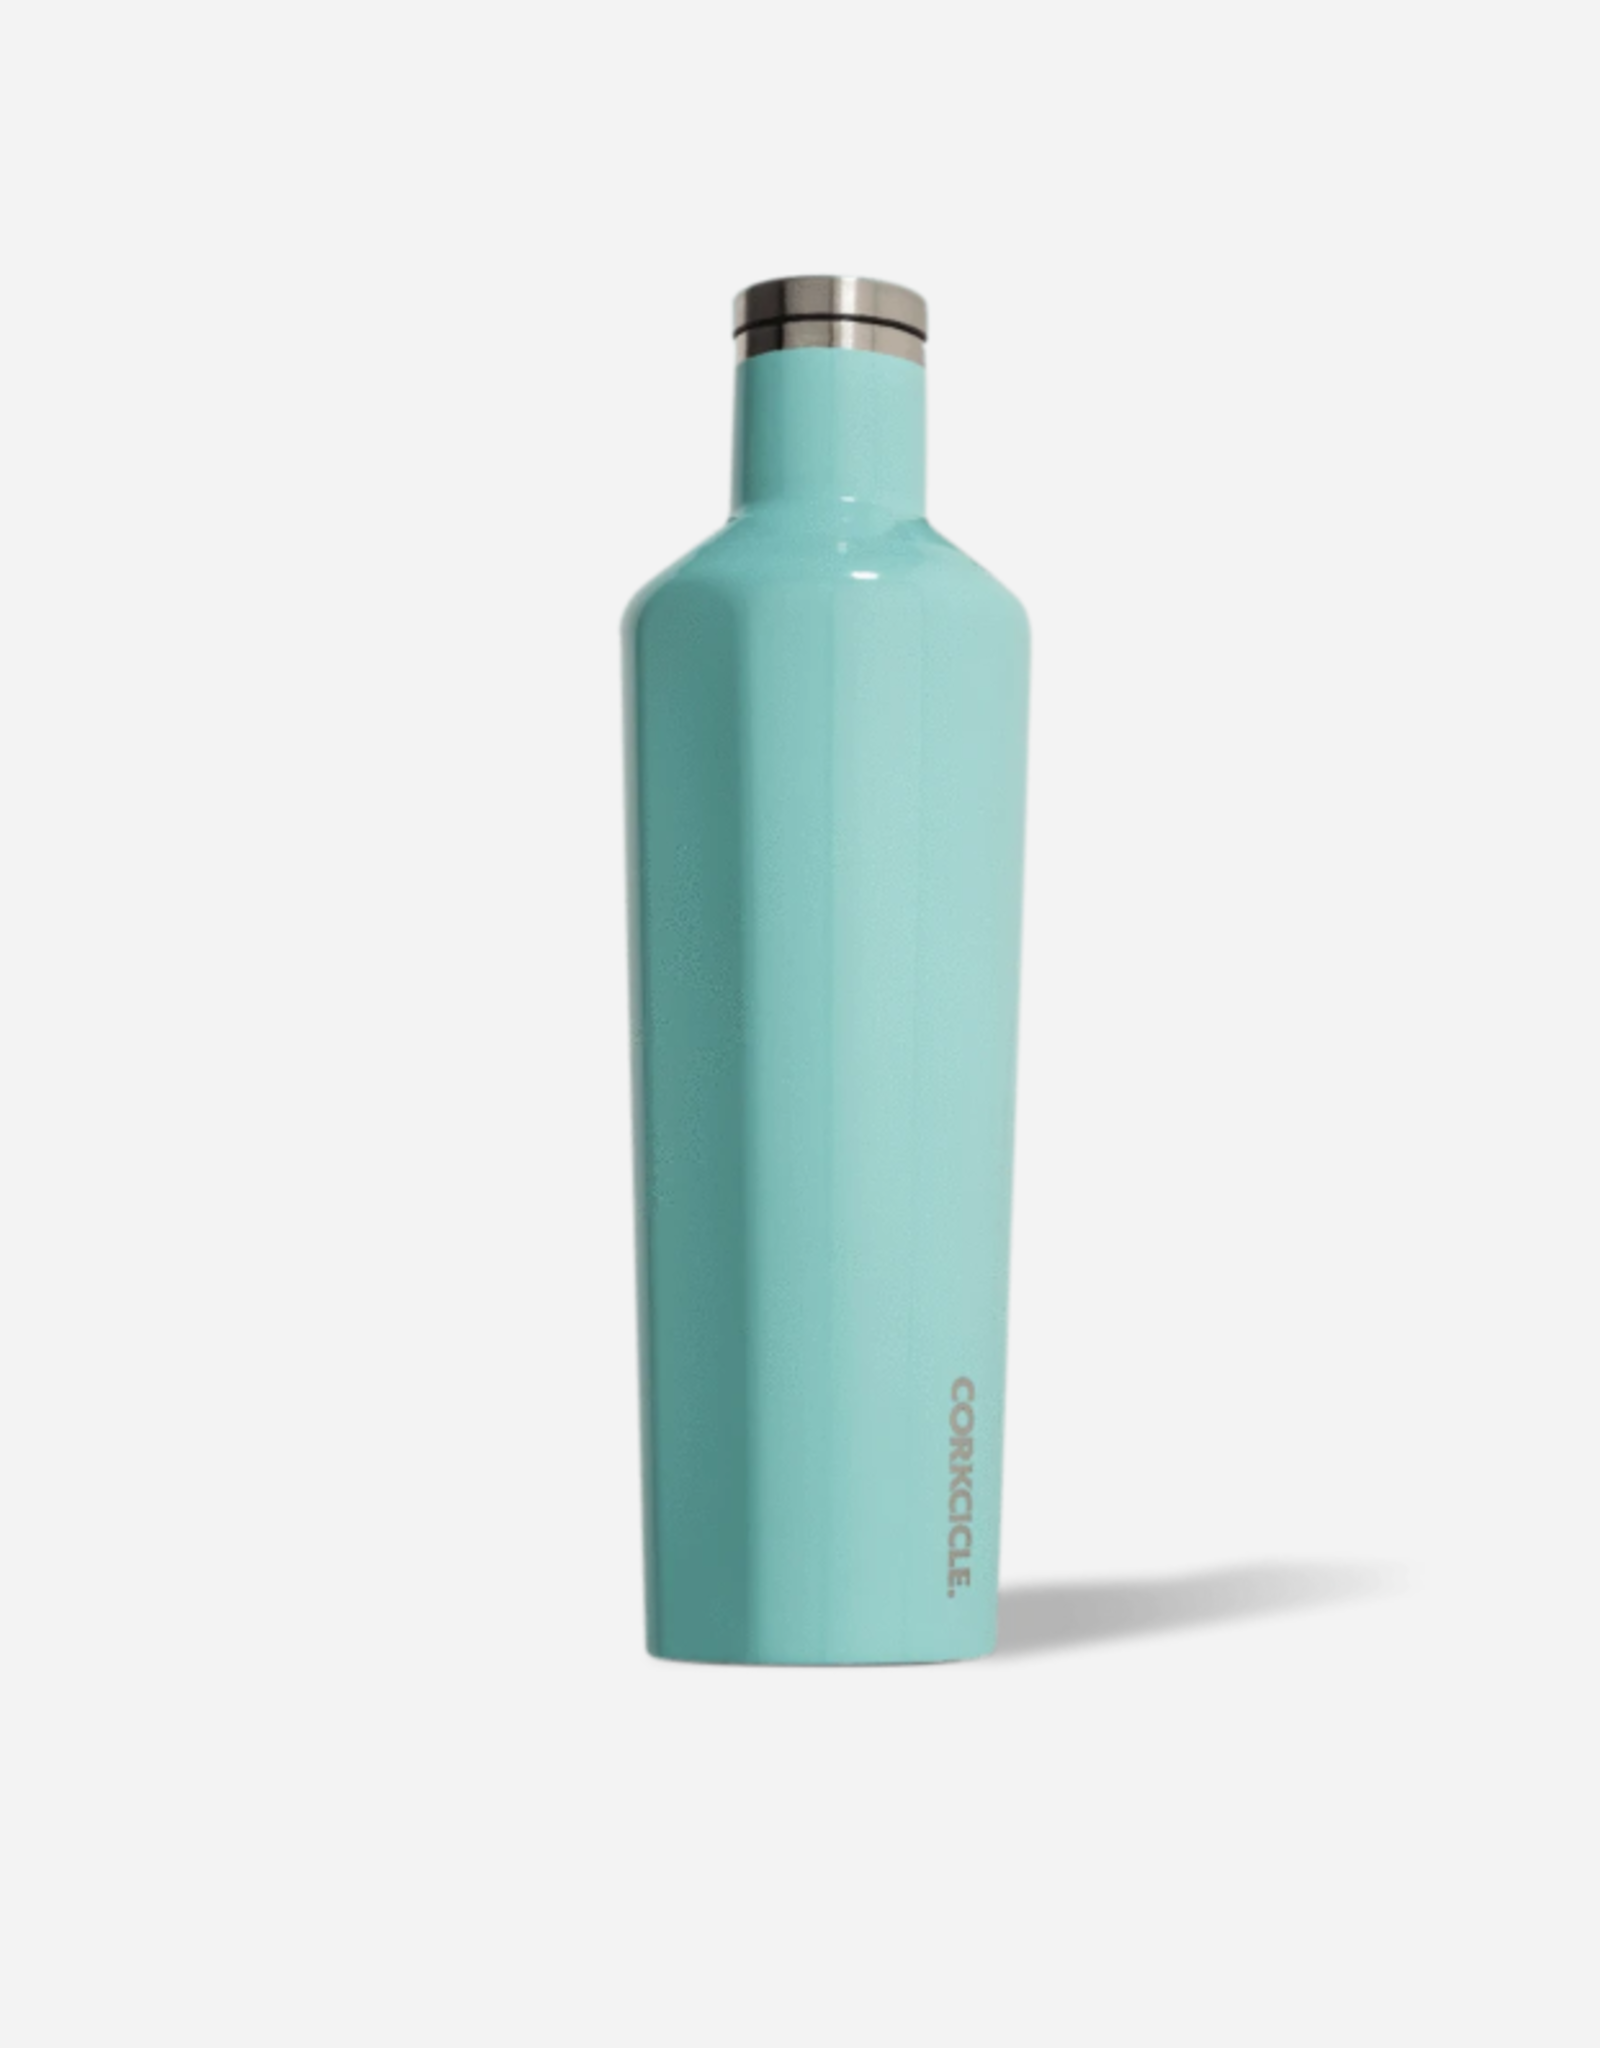 Corkcicle Corkcicle Canteen 25oz Turquoise